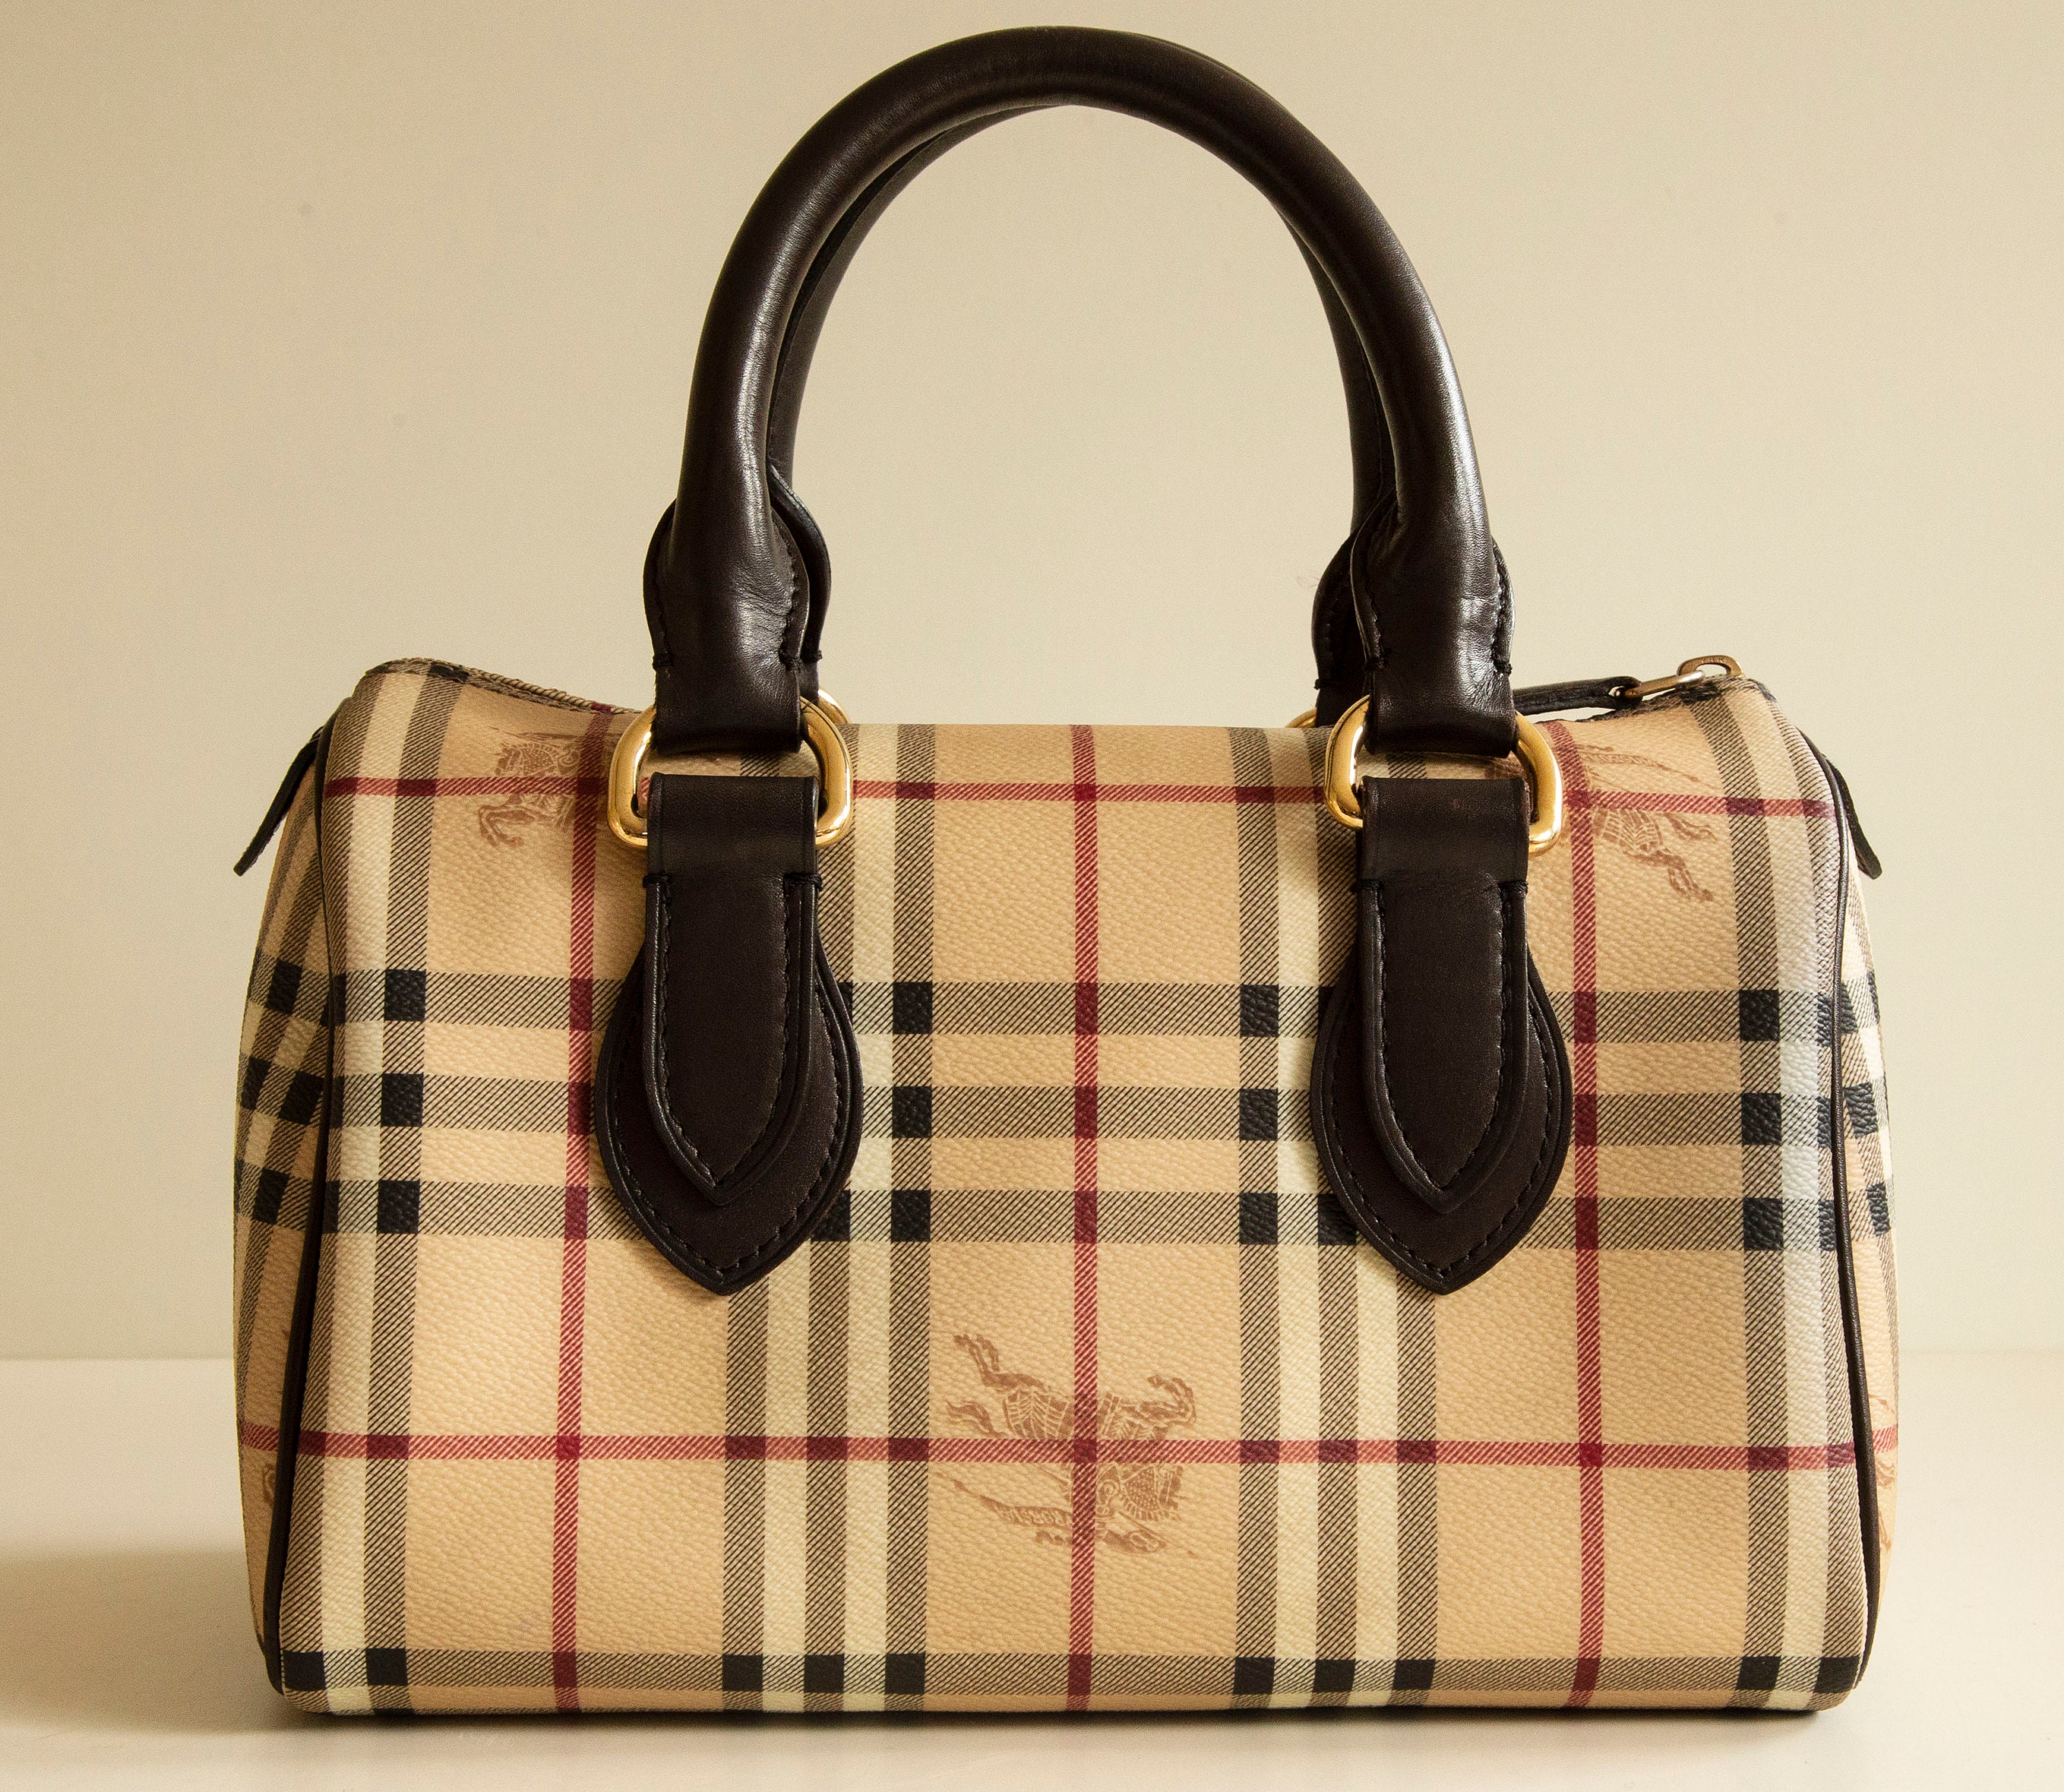 BURBERRY: bowling bag in coated cotton with Vintage Check - Beige